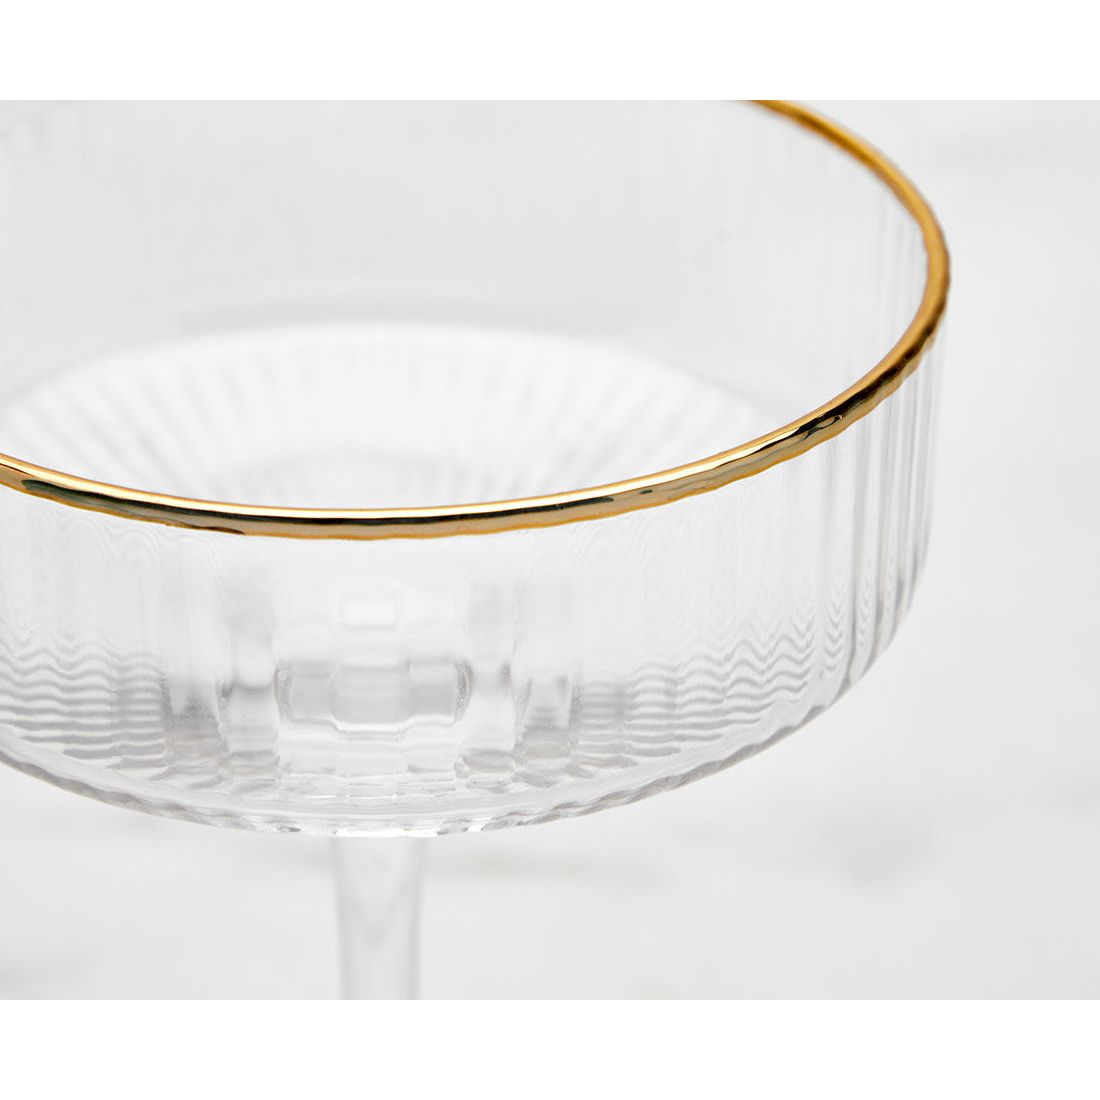 Coupe -Gold Rim vertical lines